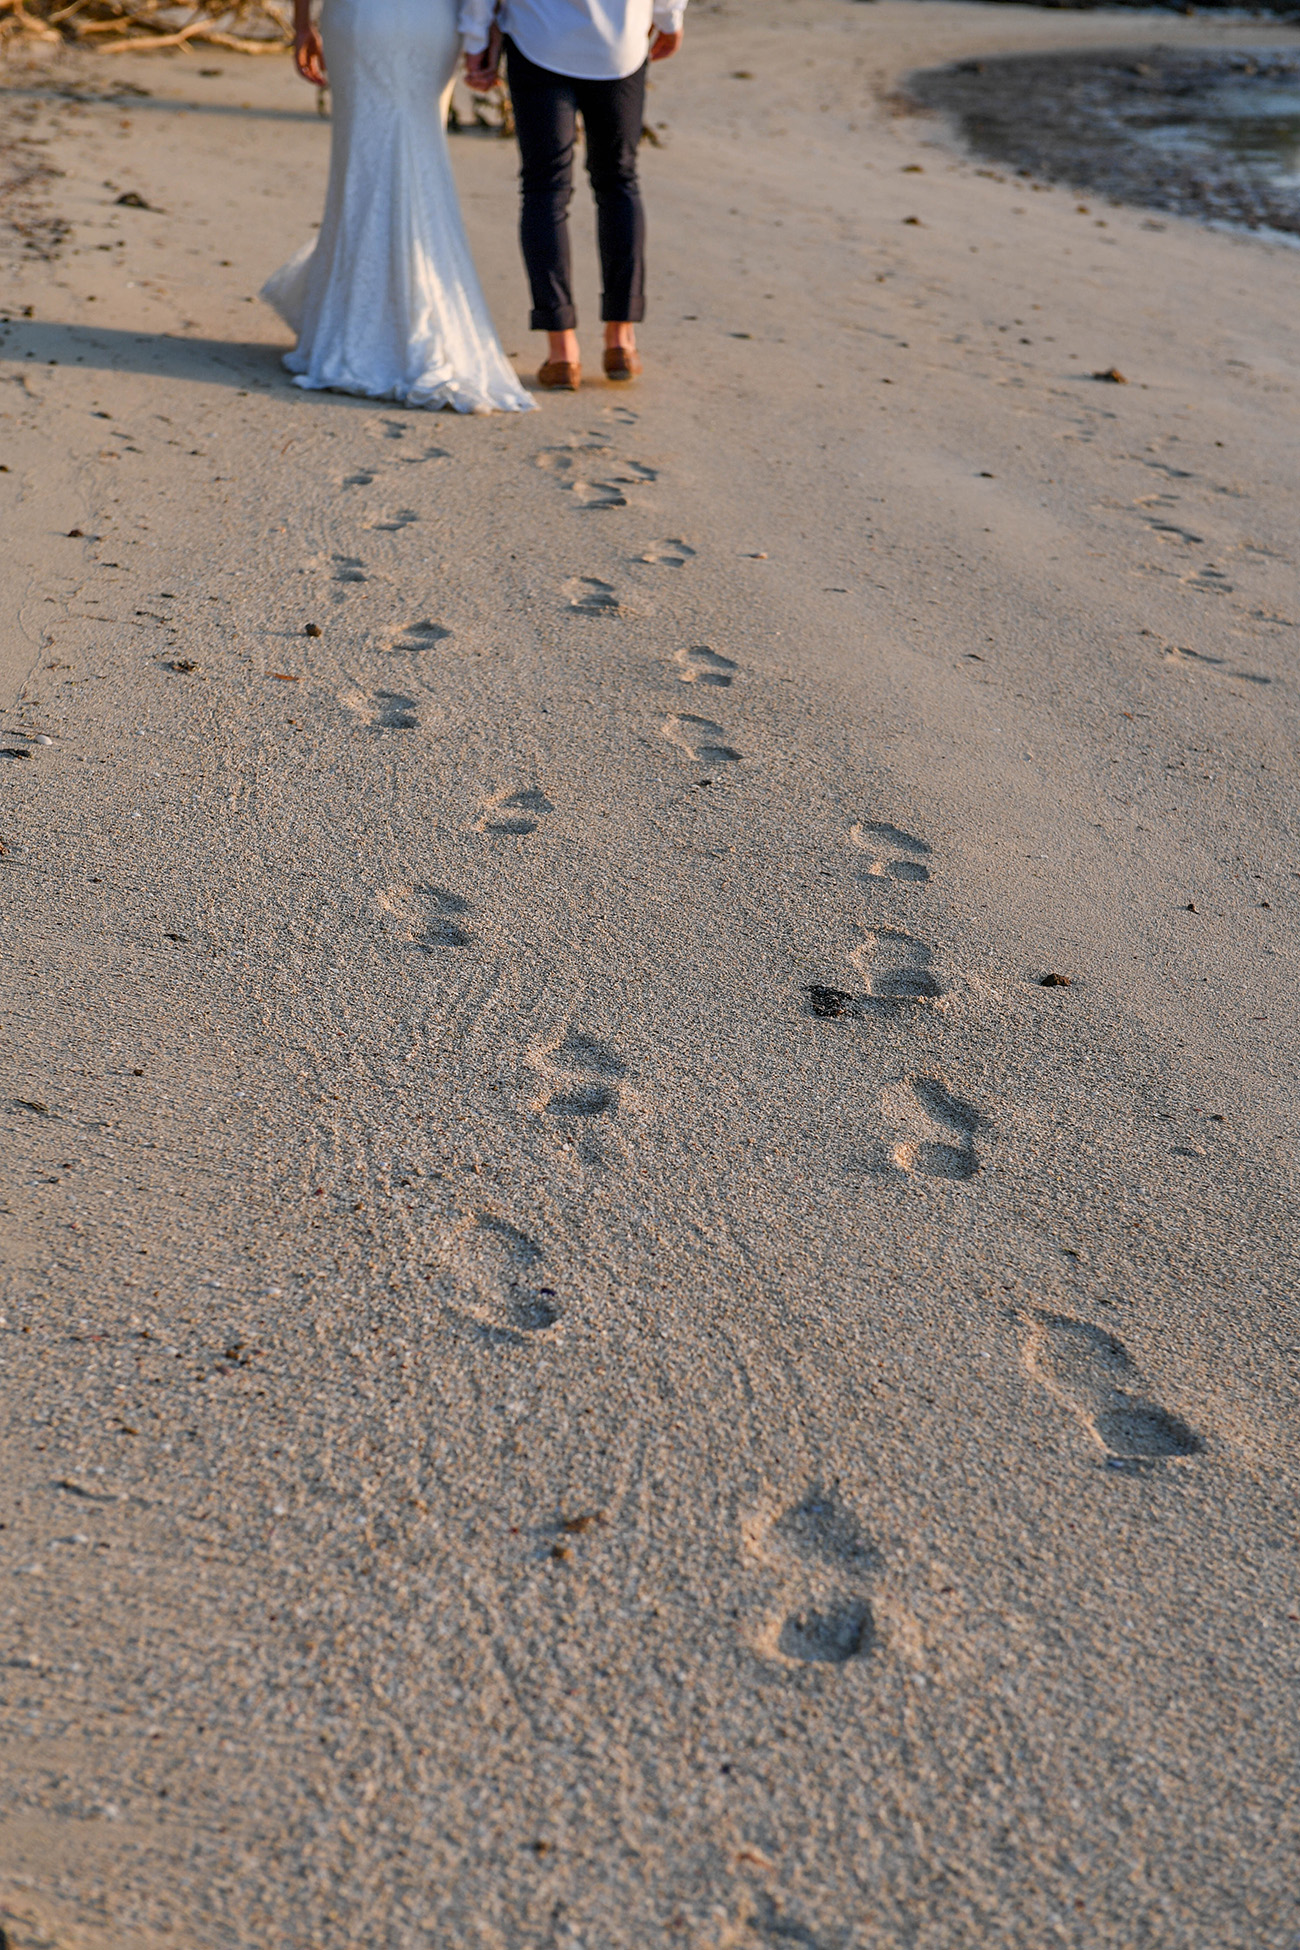 Footprints in the sand left behind by the bride and groom